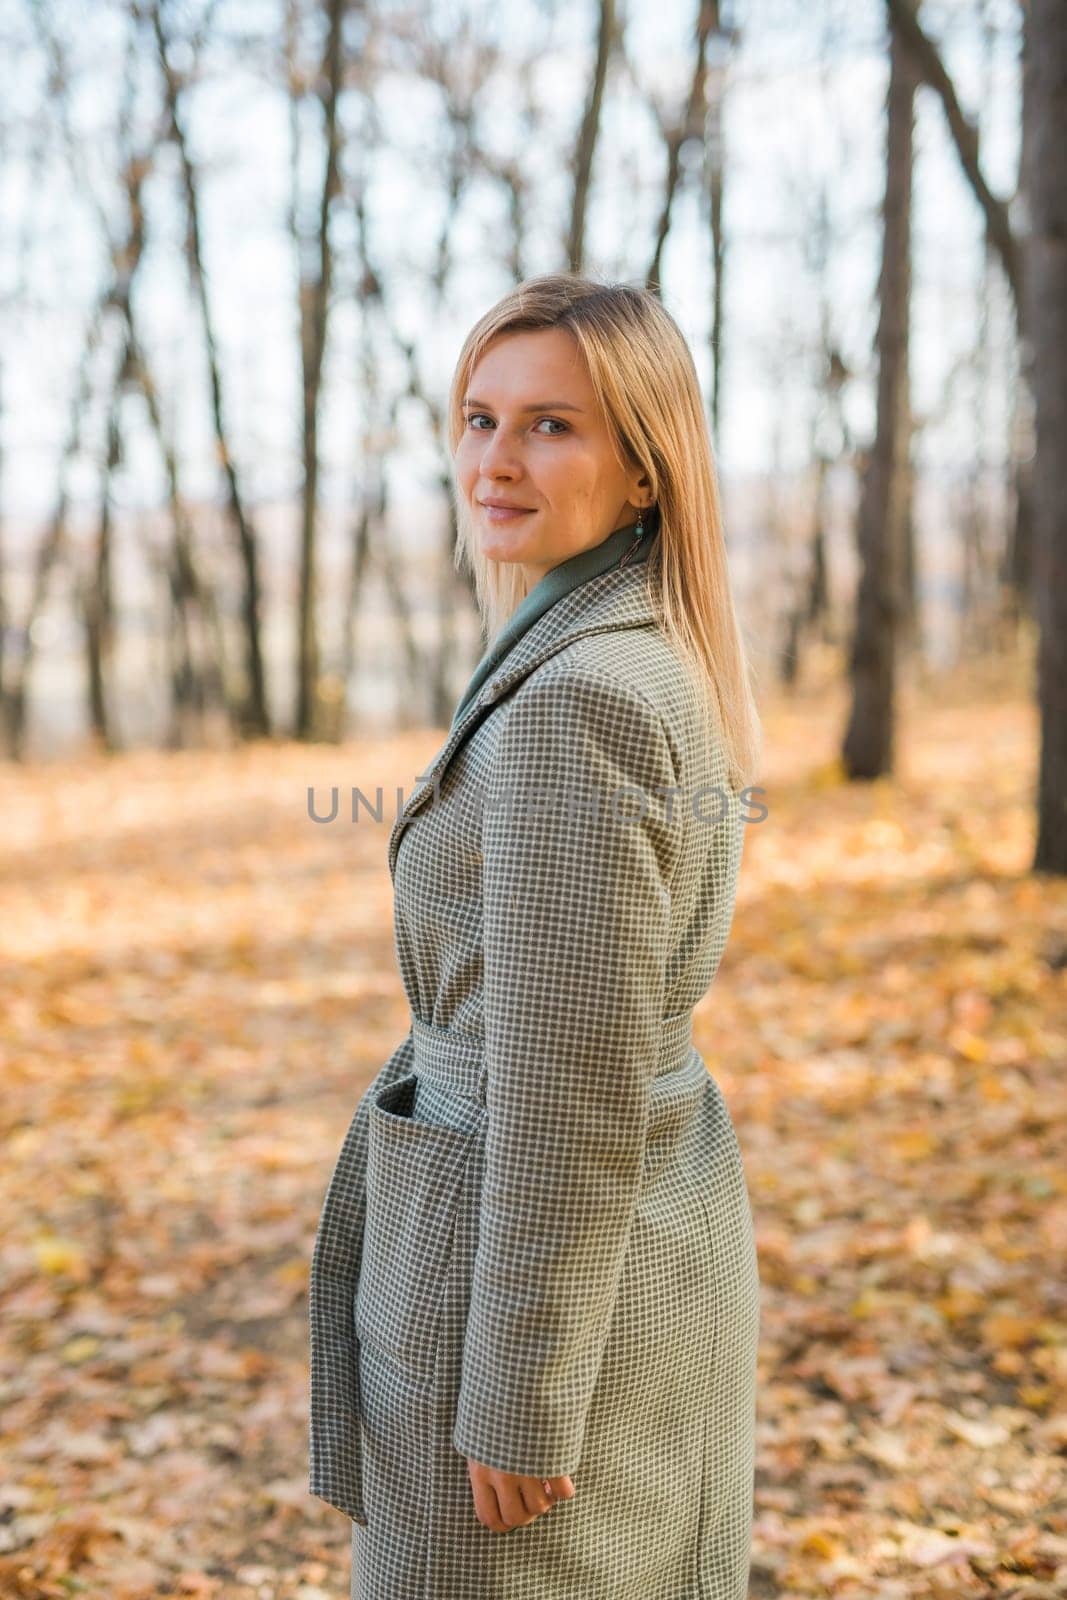 Blonde woman in elegant gray coat walks in the sunny autumn season park. Generation z and gen z youth concept